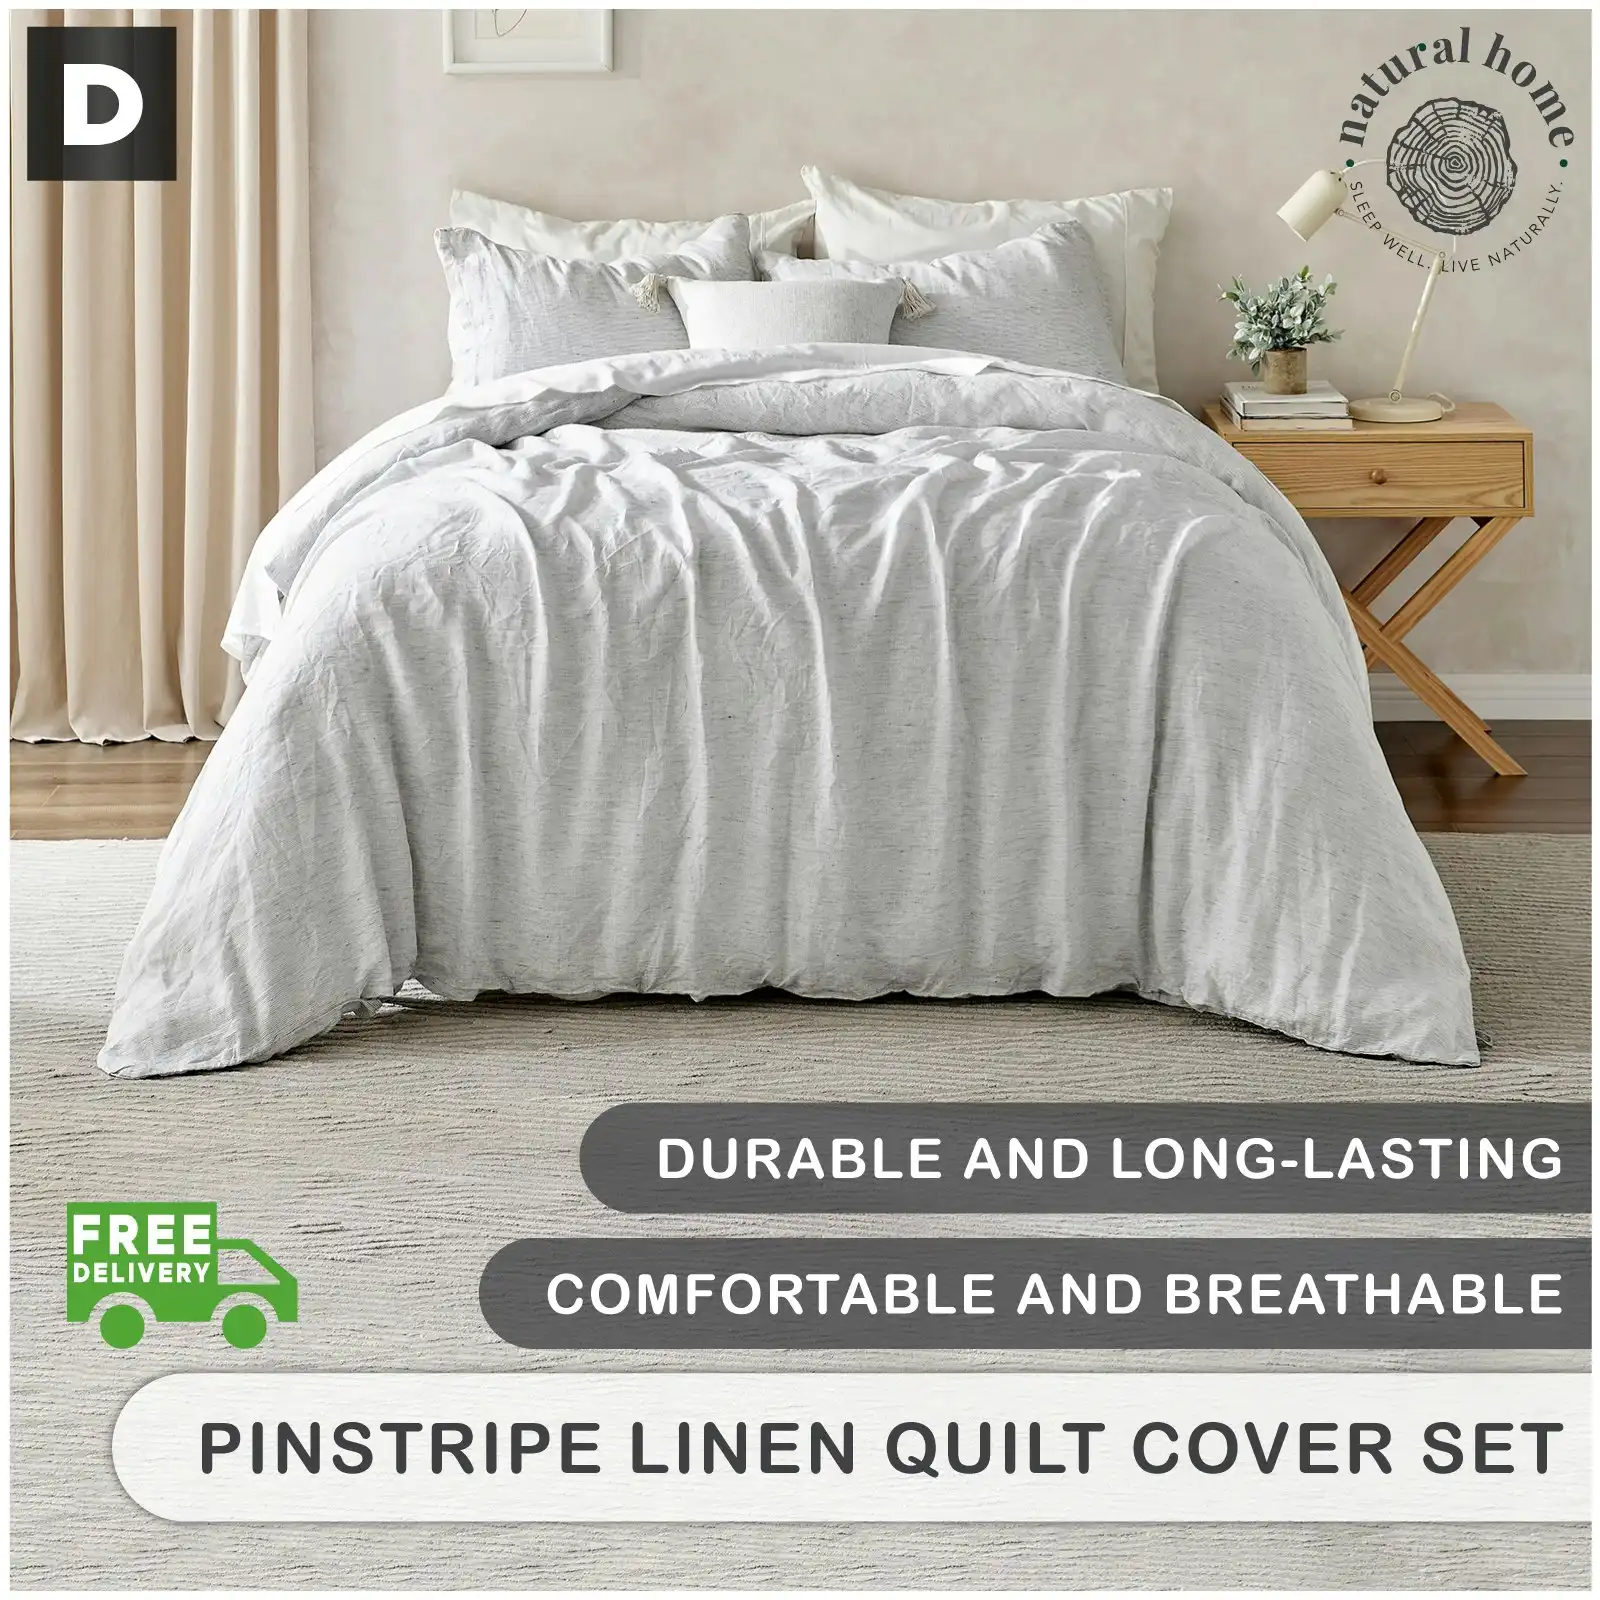 Natural Home Classic Pinstripe Linen Quilt Cover Set Dark with White Pinstripe Double Bed